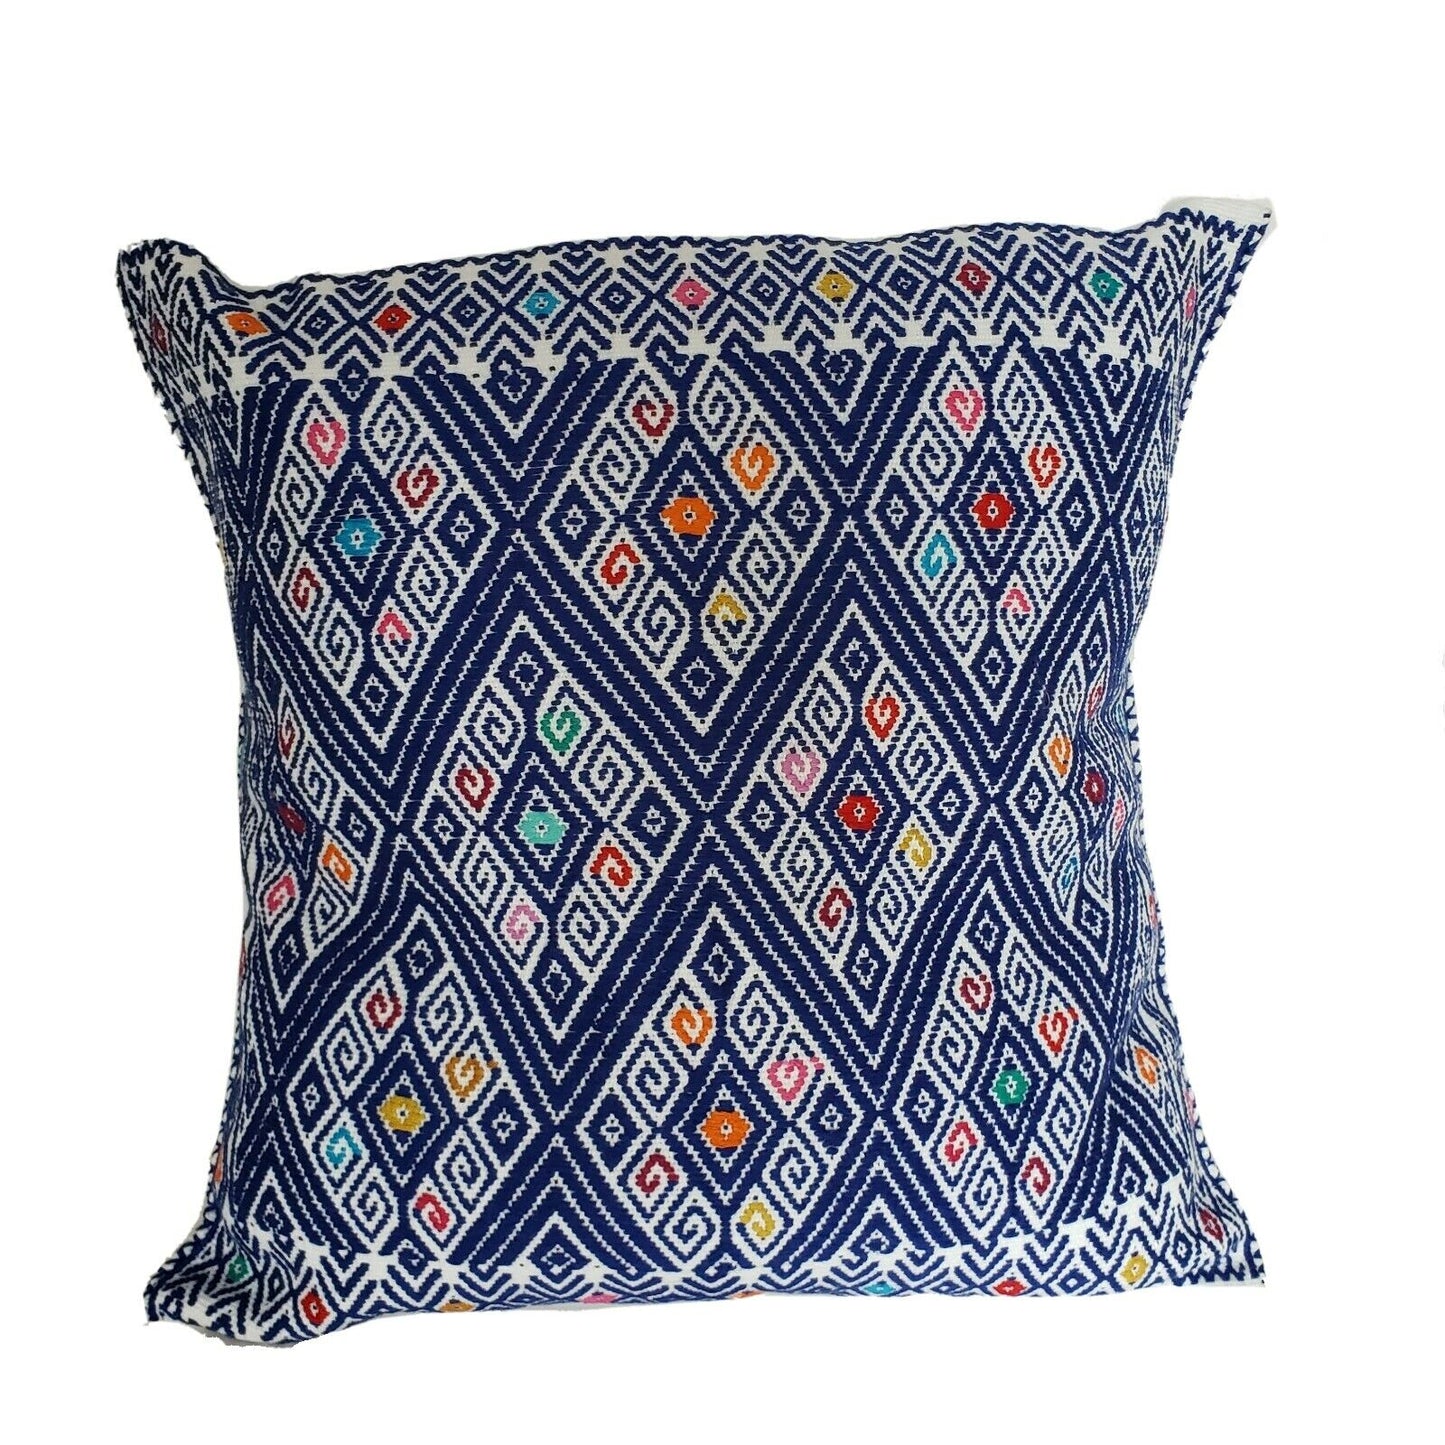 Mexican Mayan Pillow Cover Handmade Embroidered